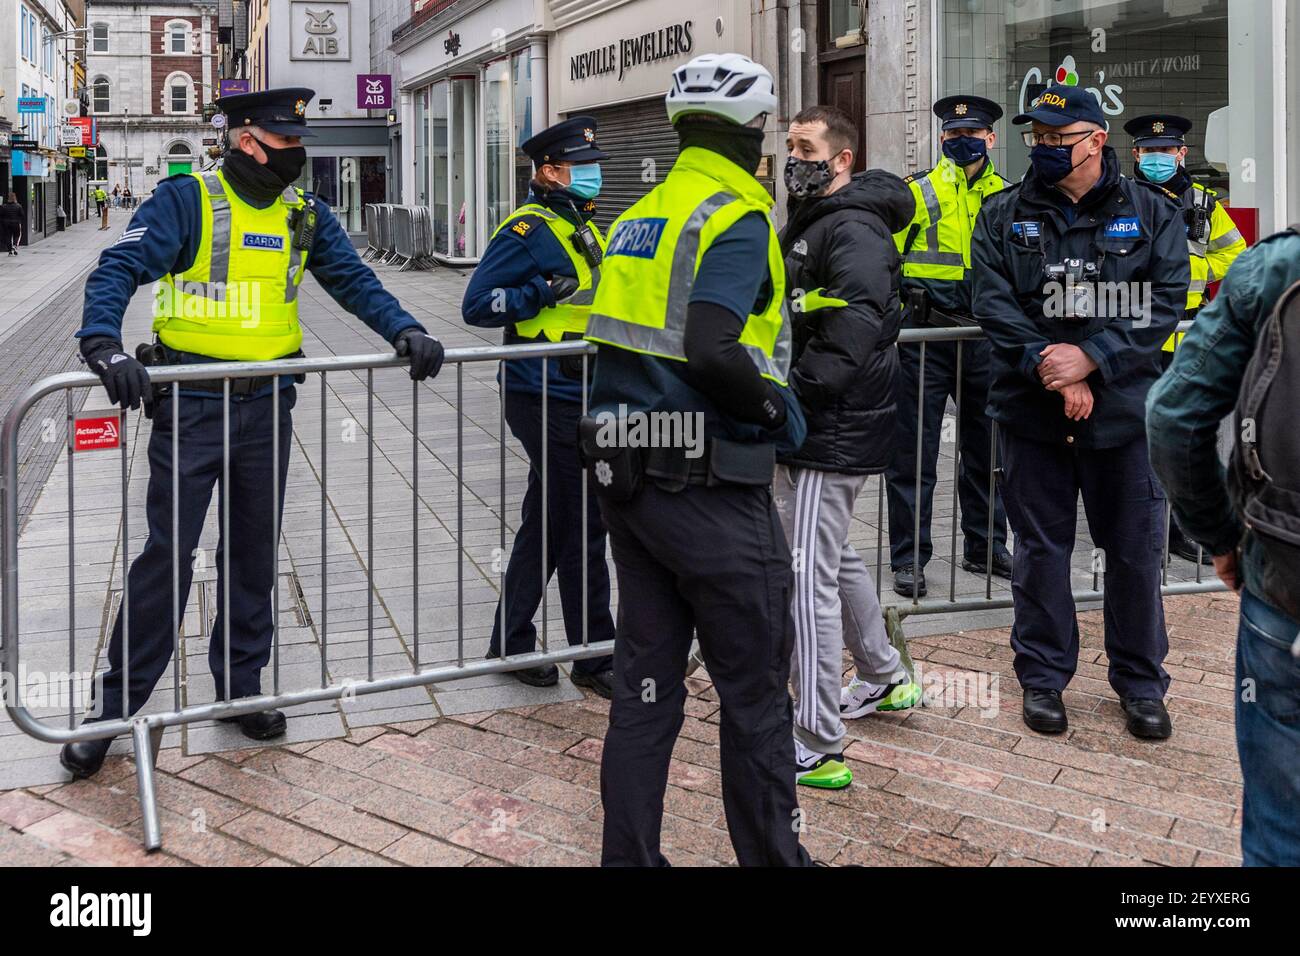 Cork, Ireland. 6th Mar, 2021. Around 700 people attended an anti-lockdown rally held in Cork city centre today. Gardai were prepared for any trouble with officers in the city centre from 10.30am. A member of the public was ushered away from the protest by uniformed Gardai. Credit: AG News/Alamy Live News Stock Photo